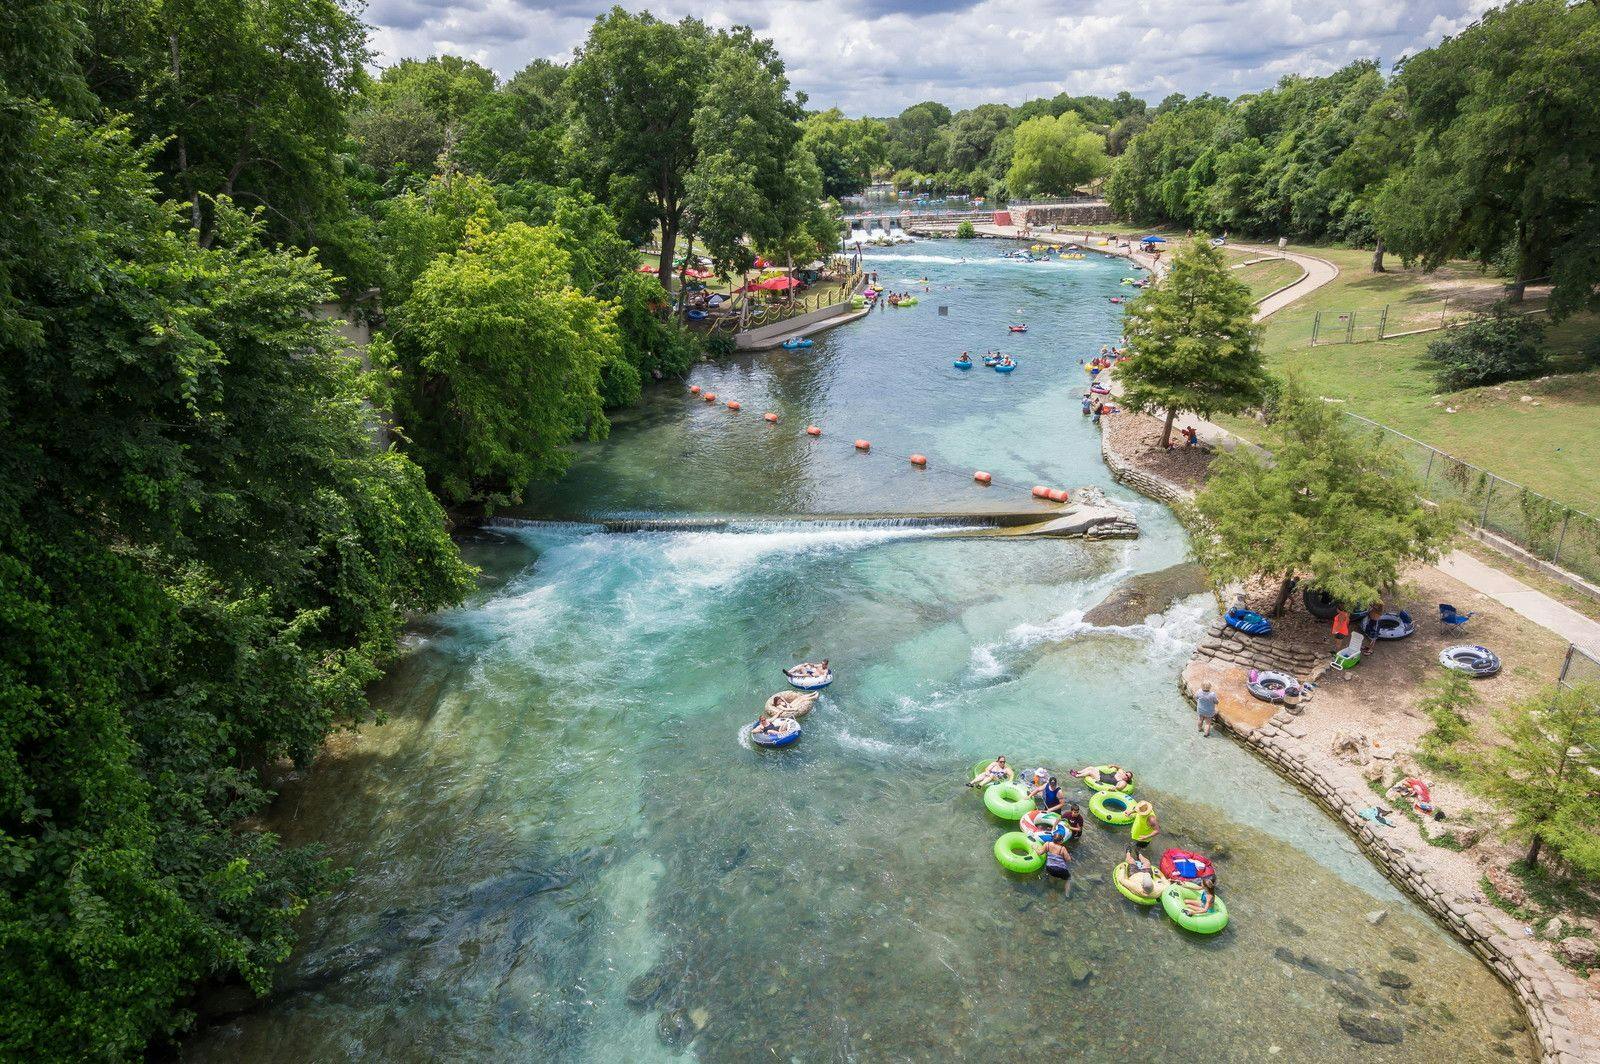 River tubing down the Guadalupe River in Texas